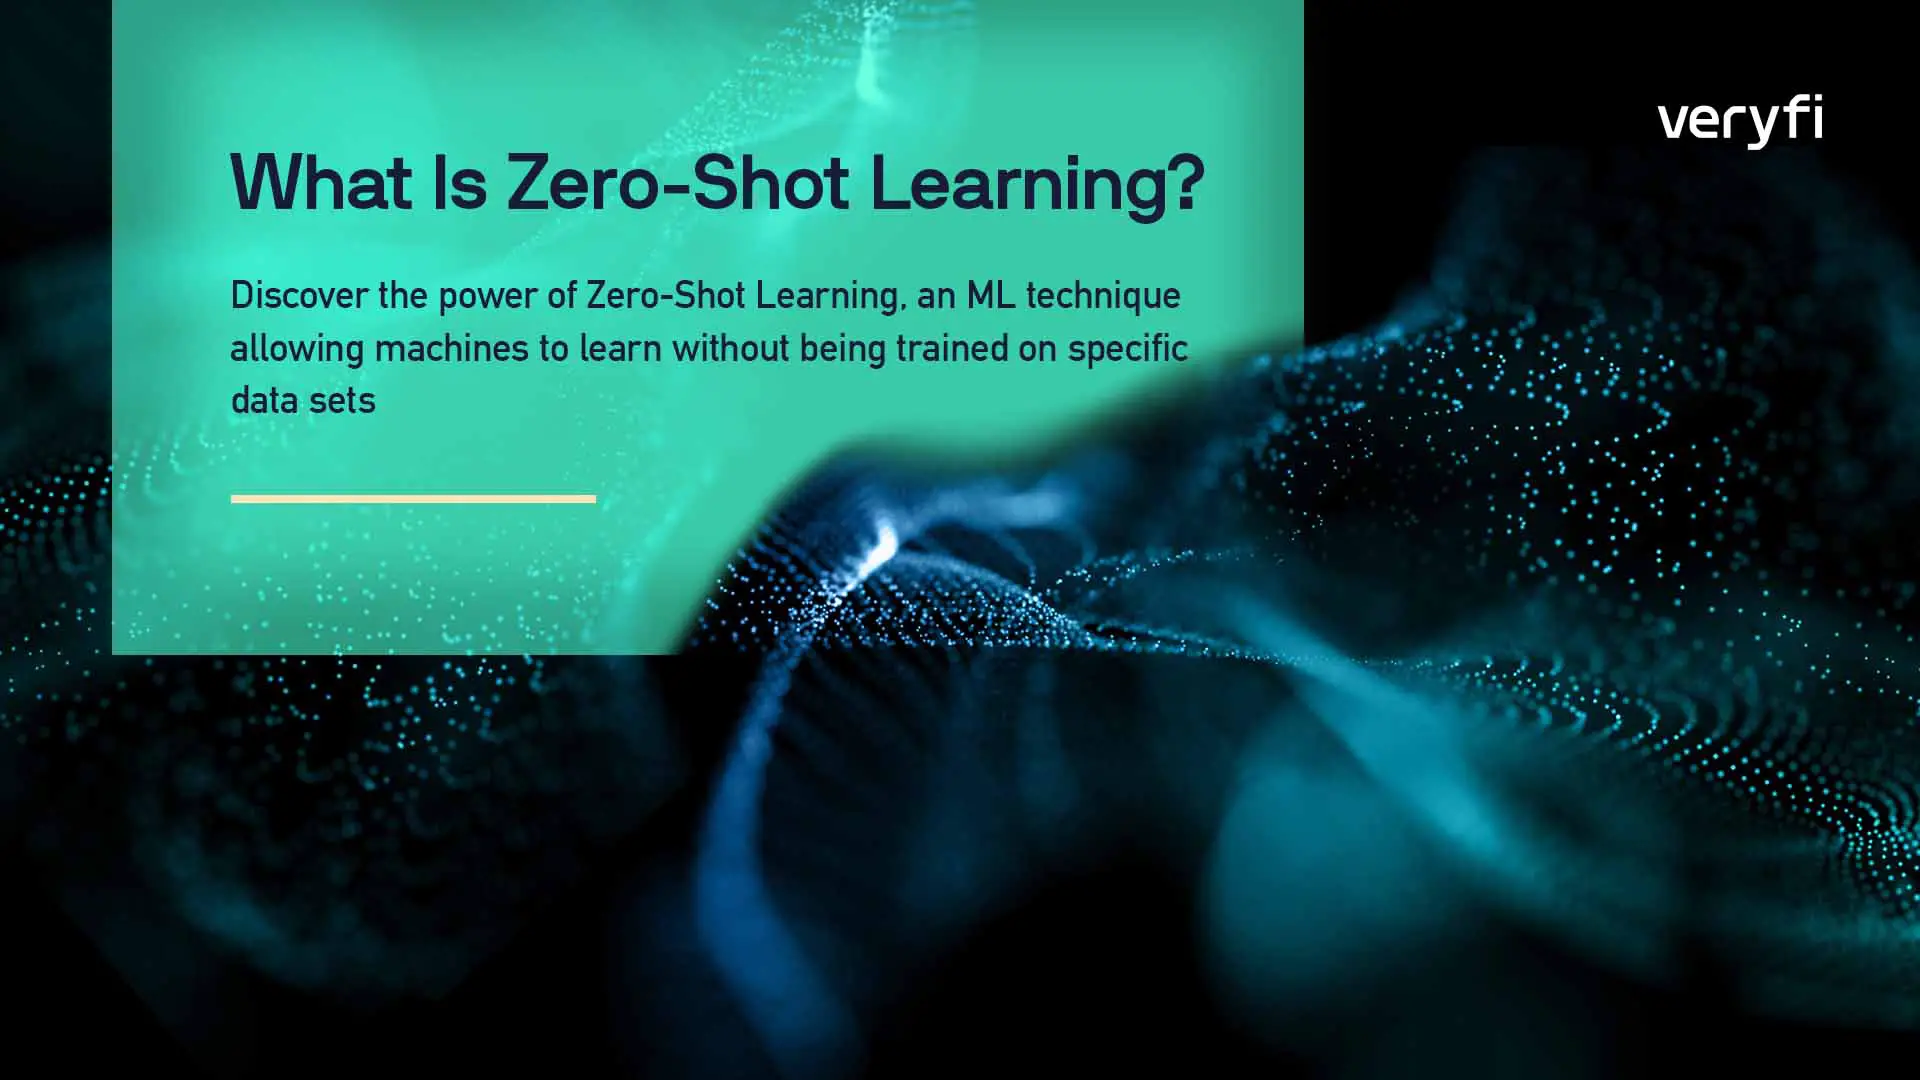 Zero-Shot Learning - Classifying Unseen Categories And Examples